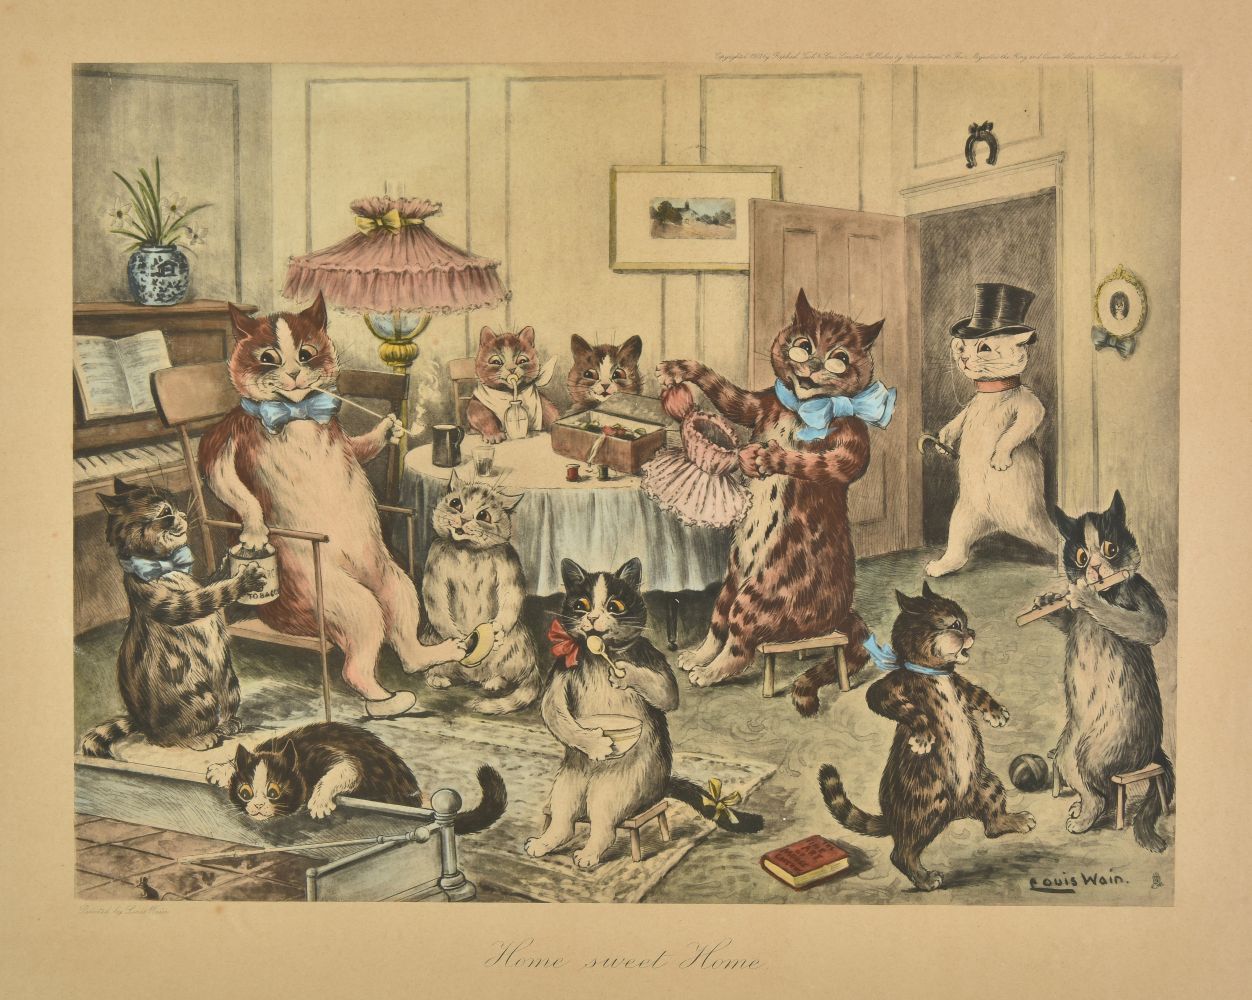 Louis Wain illustration with: 1900, book_item, cane, caption, cat, cat:tabby, cat:tuxedo, clothes:bowtie, clothes:glasses, clothes:hat, color:brown, color:grey, color:white, drinking, eating, flower, humanised, indoors, kitten, manysubjects, meta:has_source, mouse, music:dancing, music:piano, music:wind, profile, sheet_music, smiling, smoking, spotted, subject:music